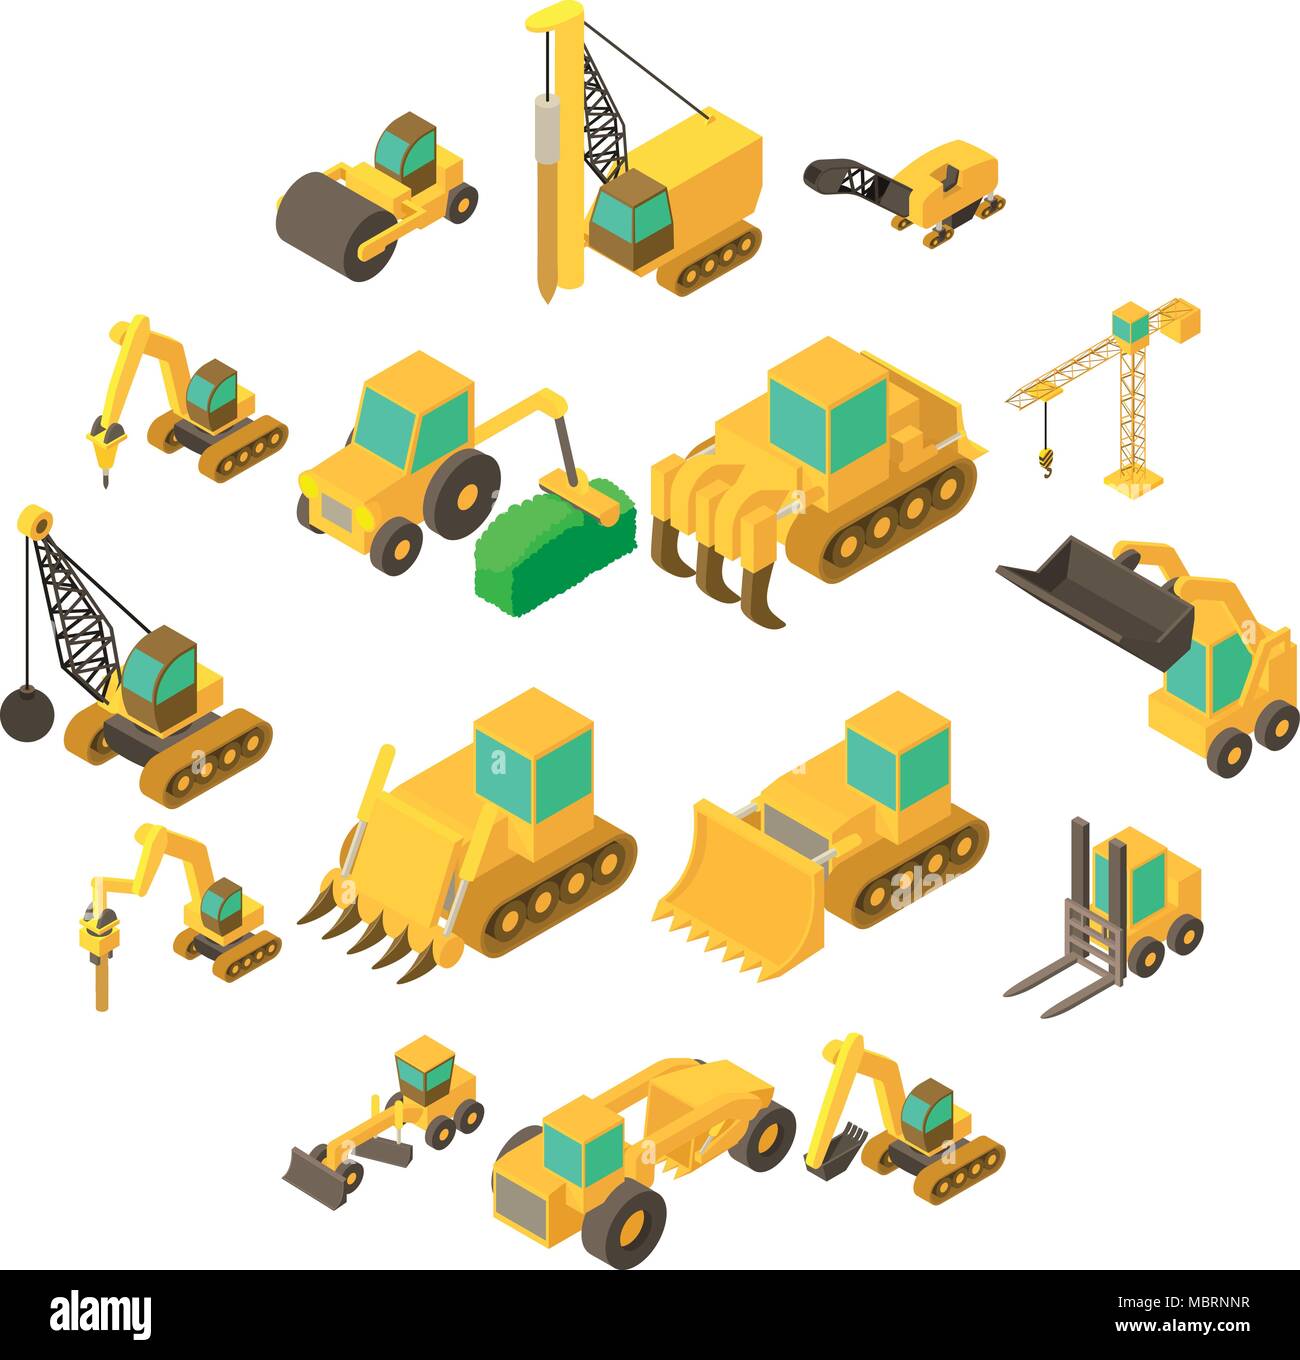 Building vehicles icons set, isometric style Stock Vector